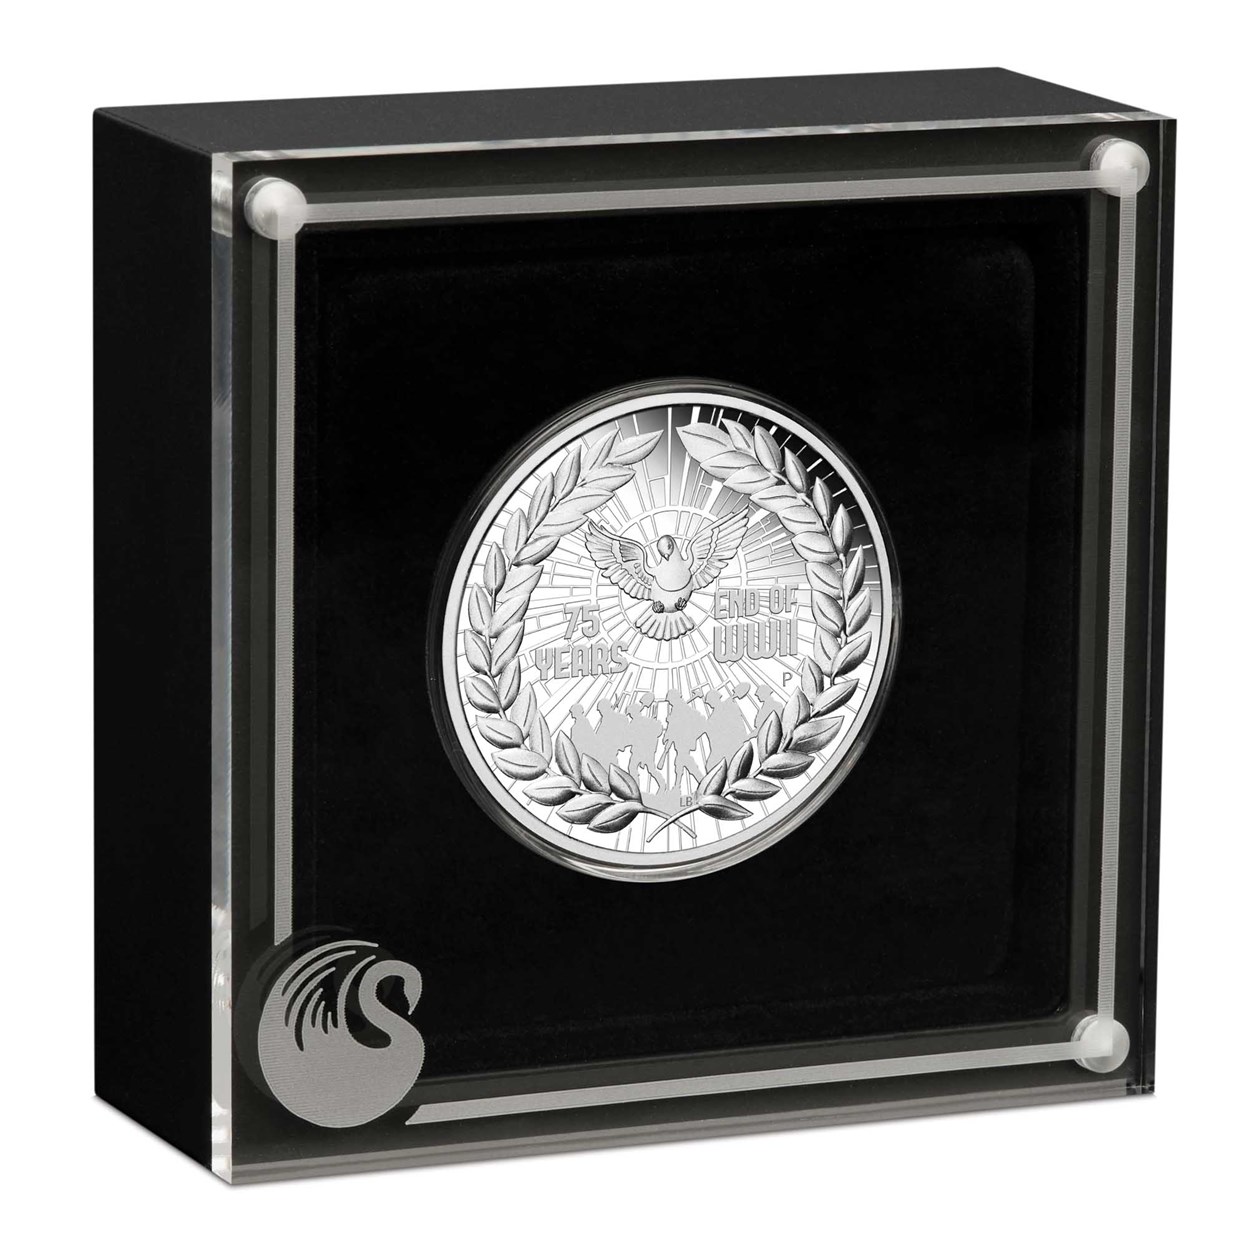 03 end of wwii 75th anniversary 2020 1oz silver proof InCase